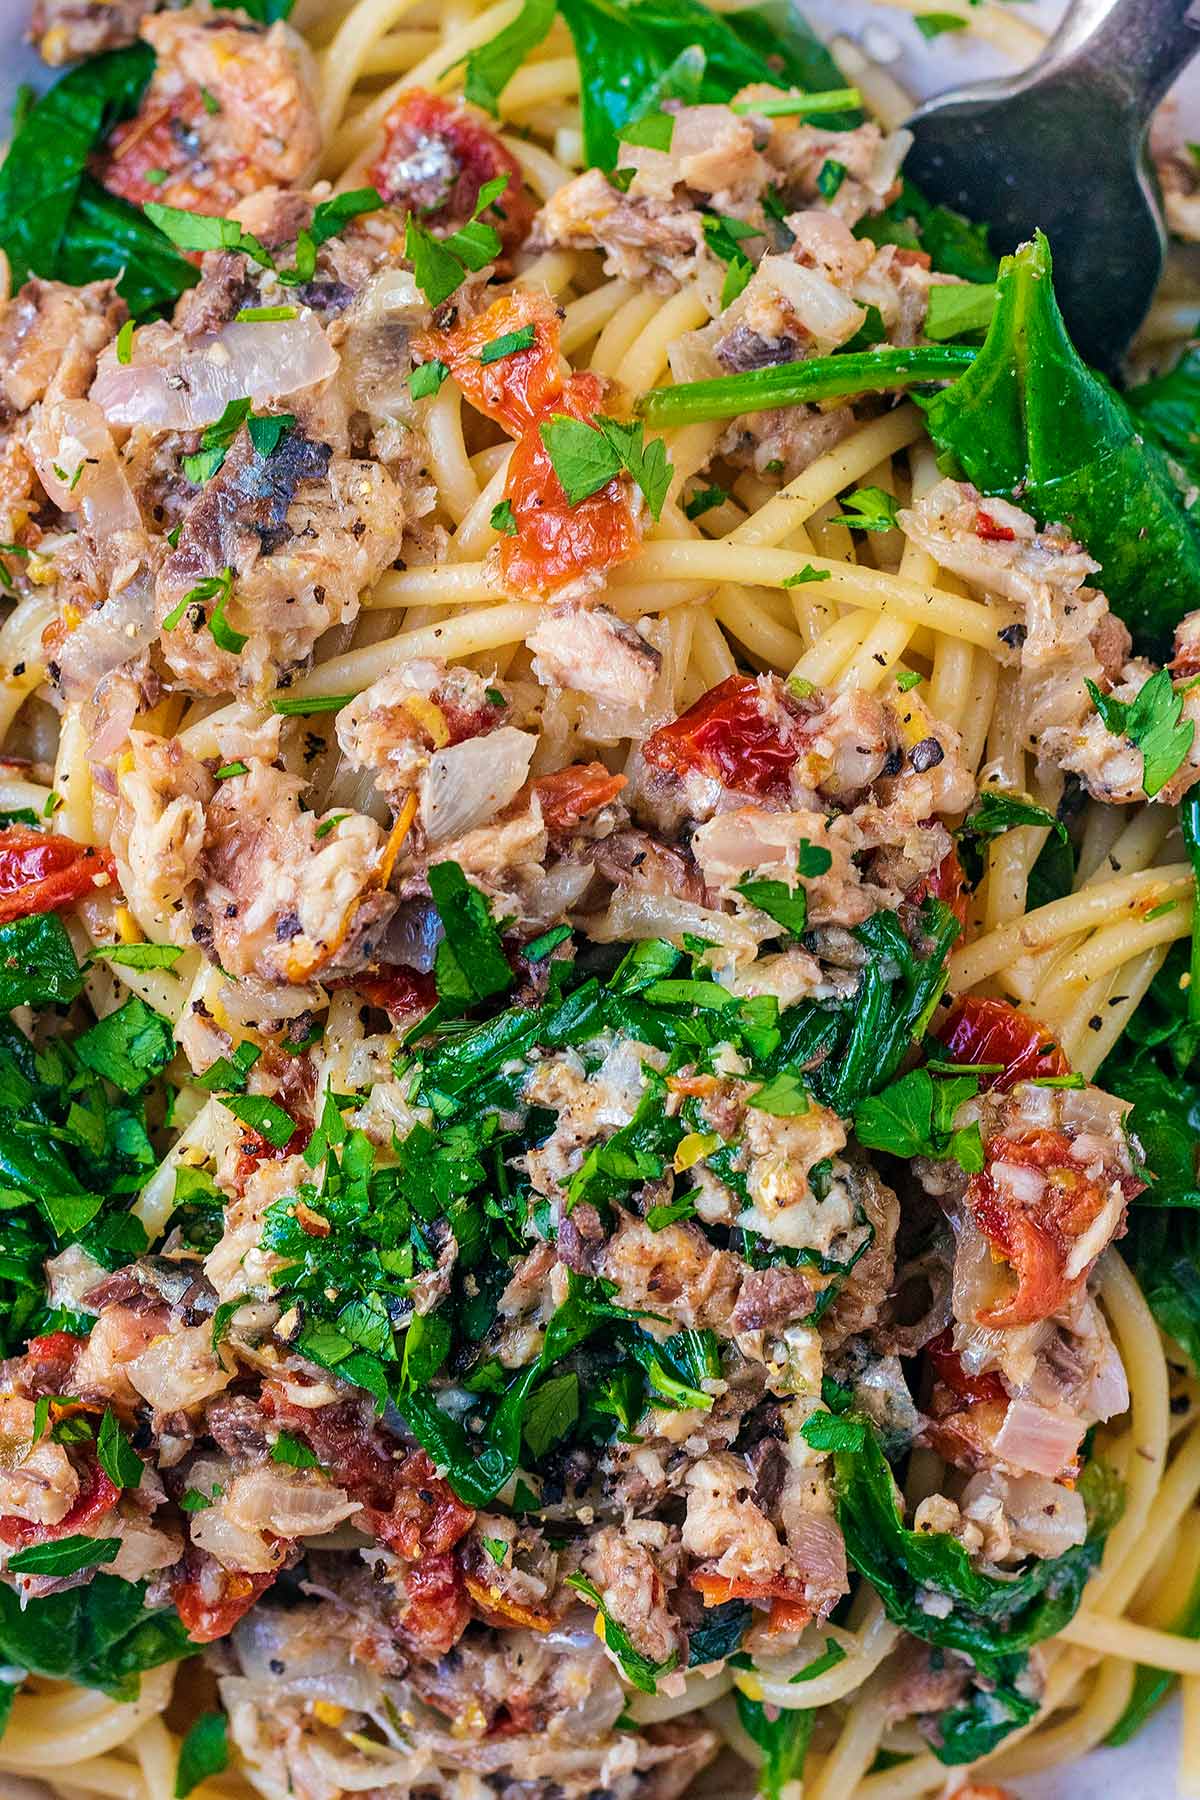 Chopped sardines, spinach and herbs mixed into spaghetti.